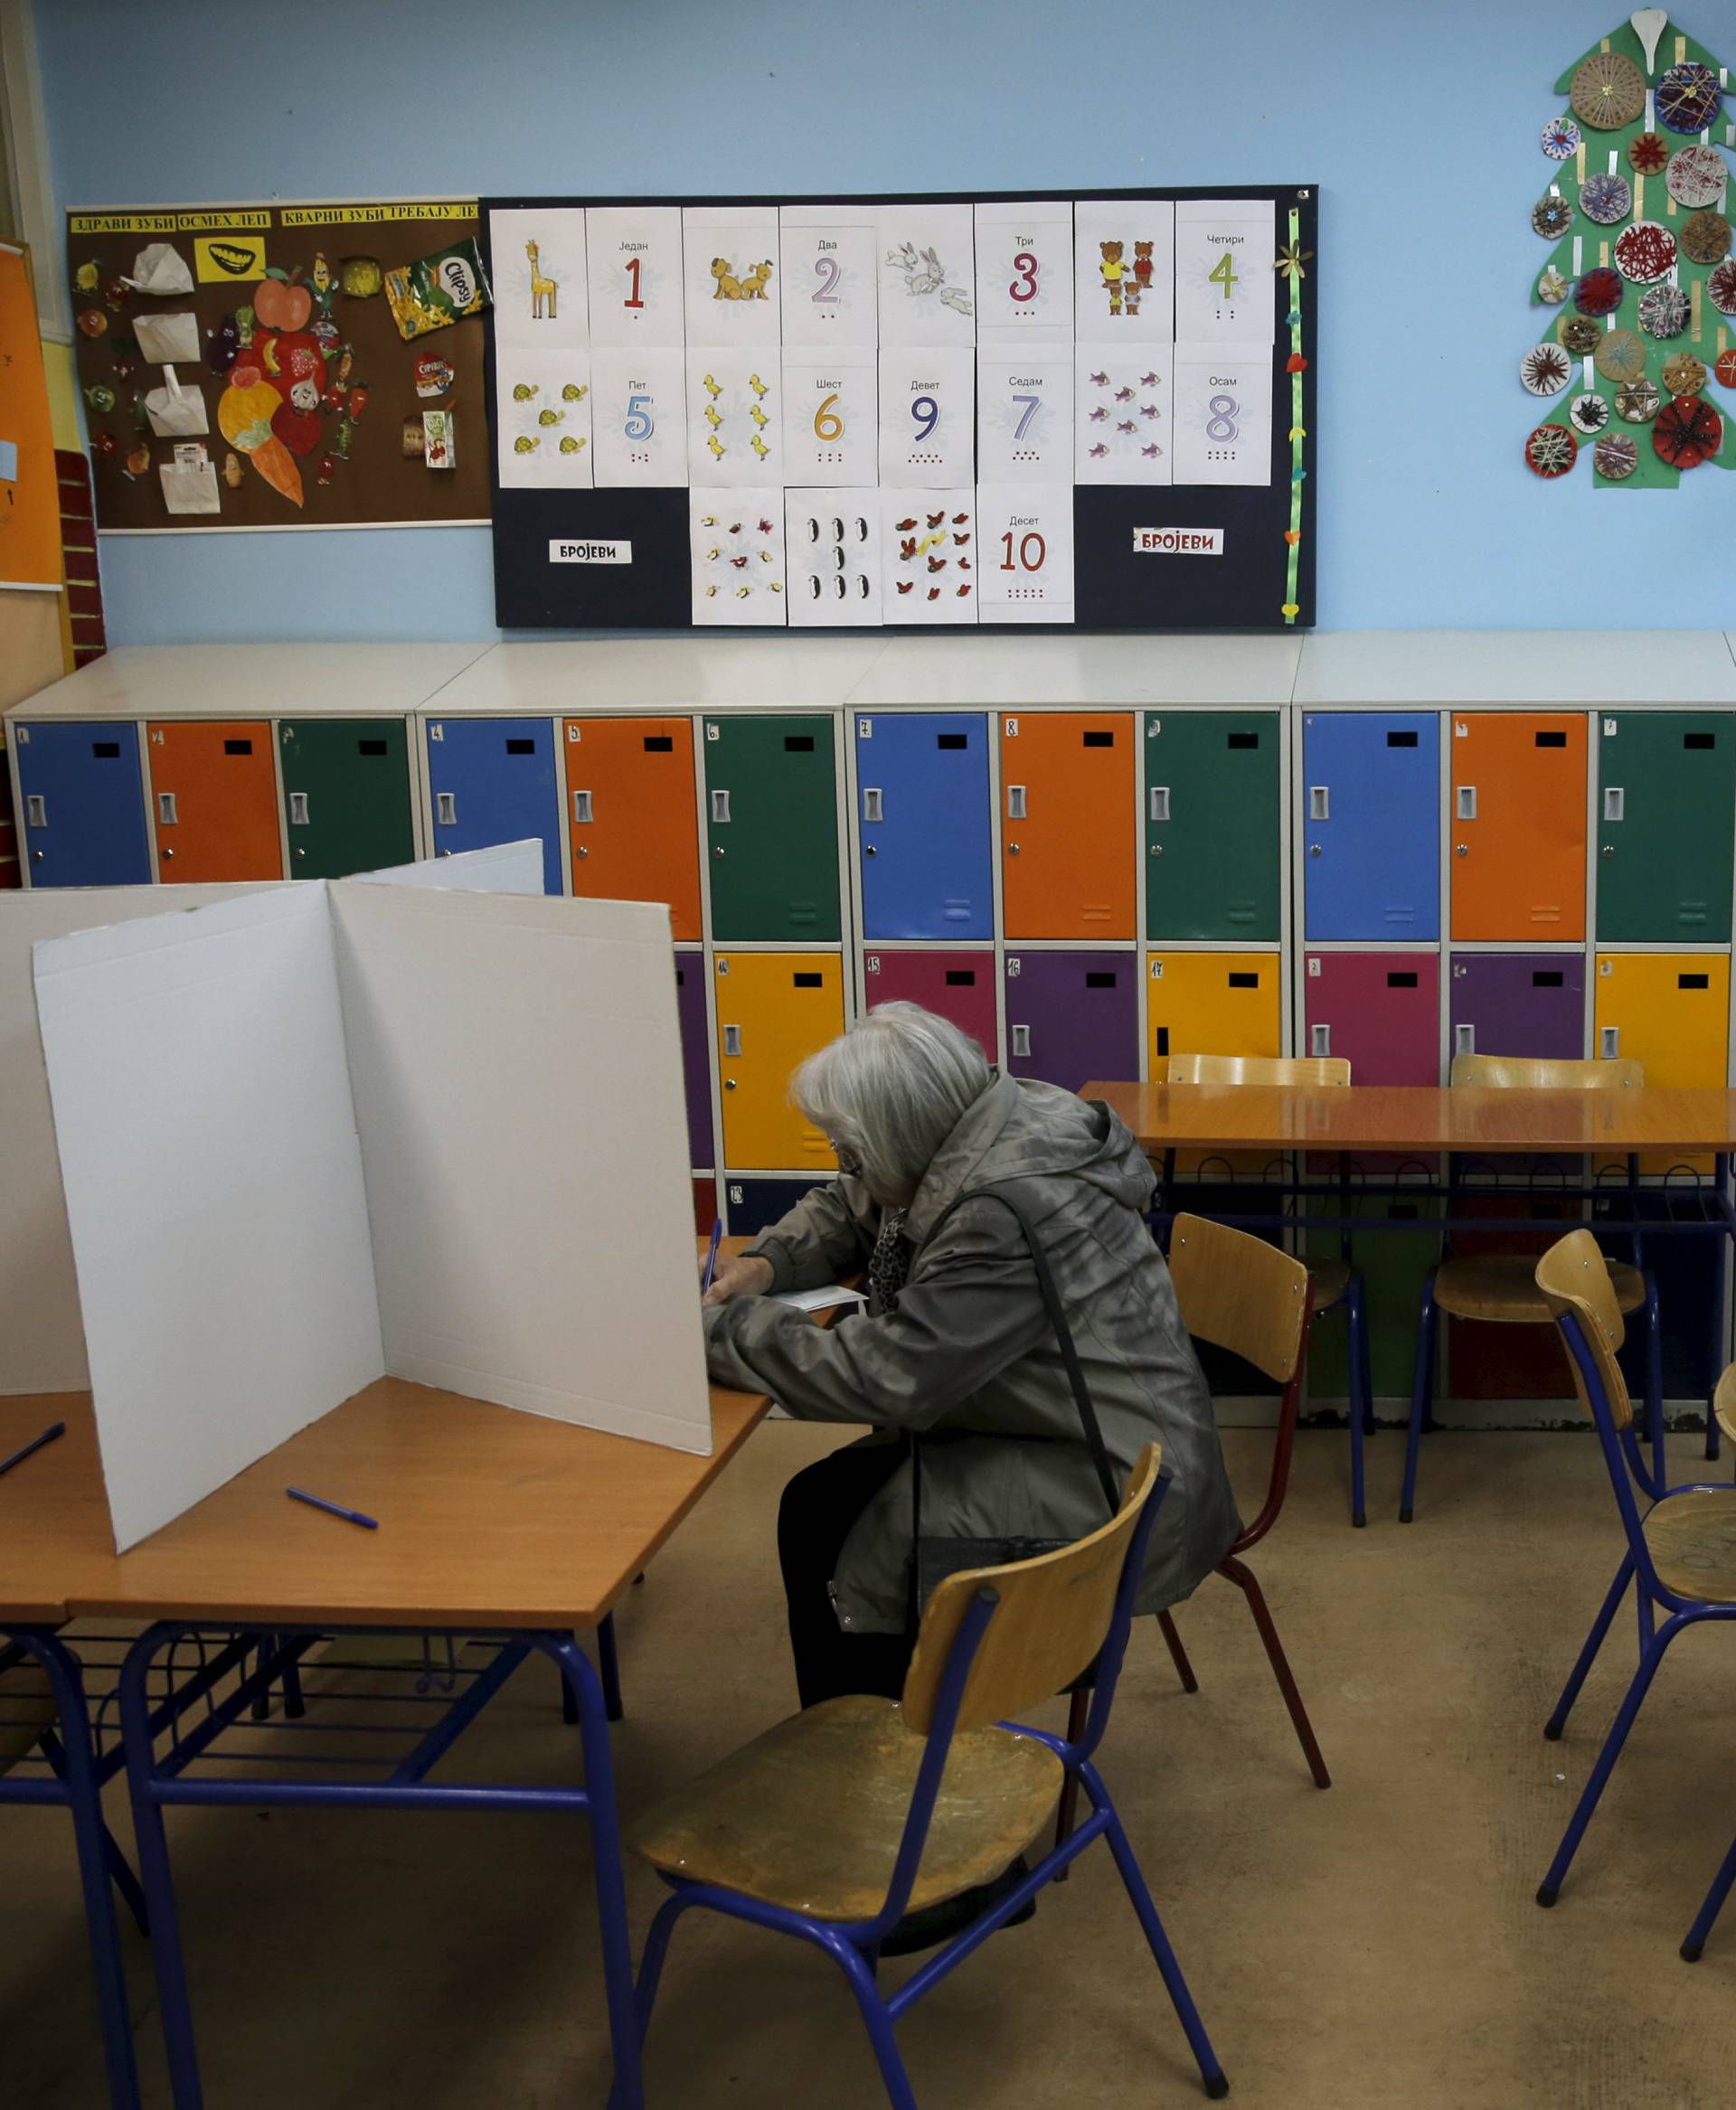 A woman casts her vote at a polling station during elections in Belgrade